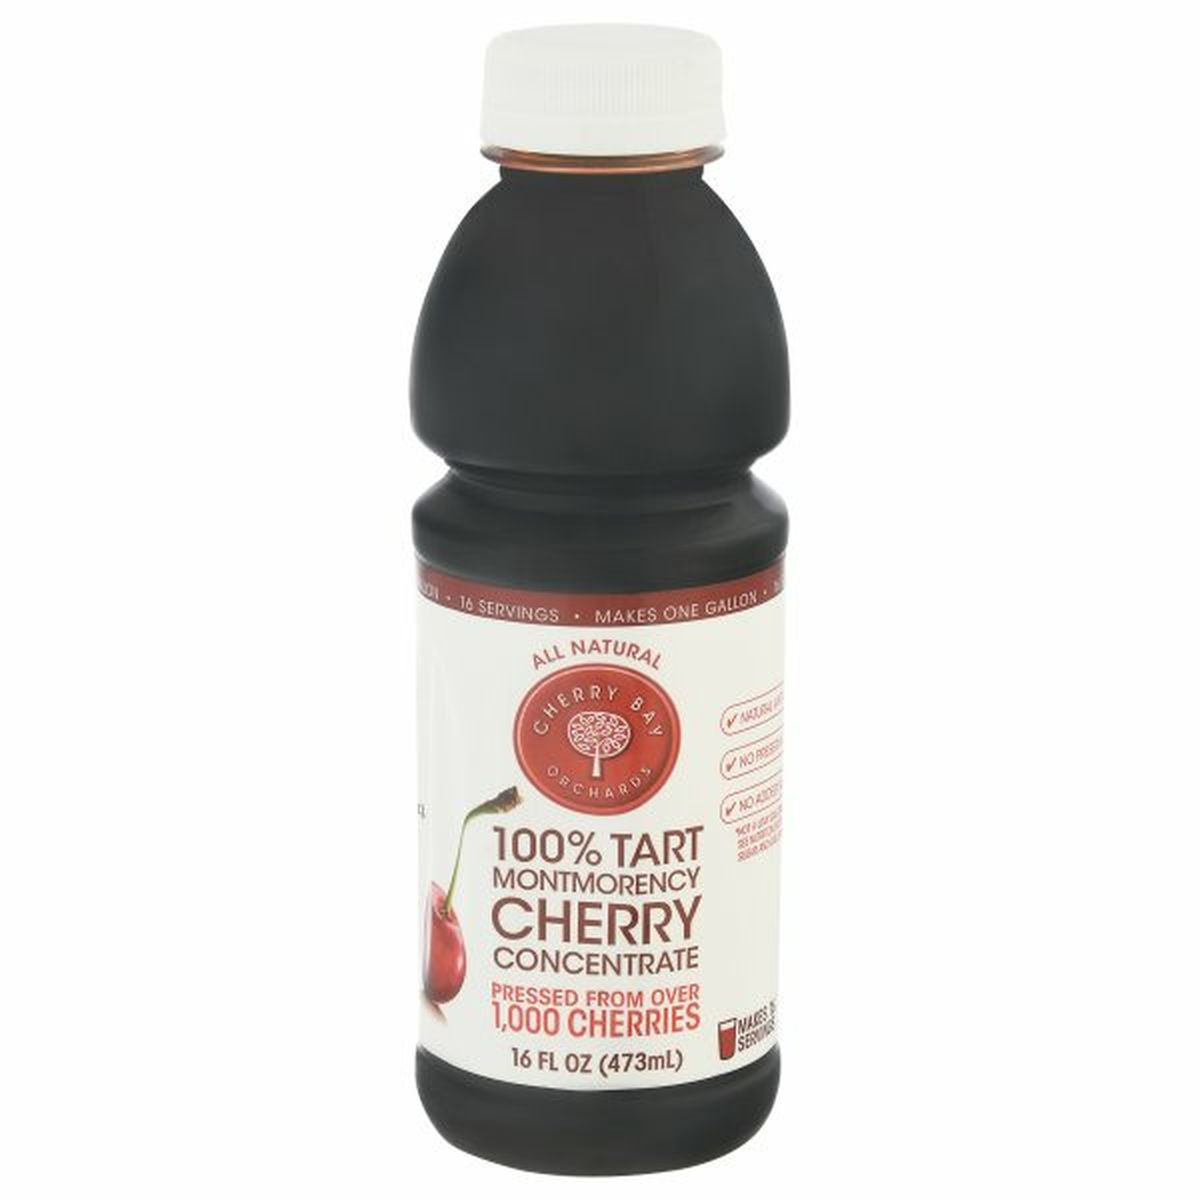 Calories in Cherry Bay Orchards Cherry Concentrate, 100% Tart Montmorency